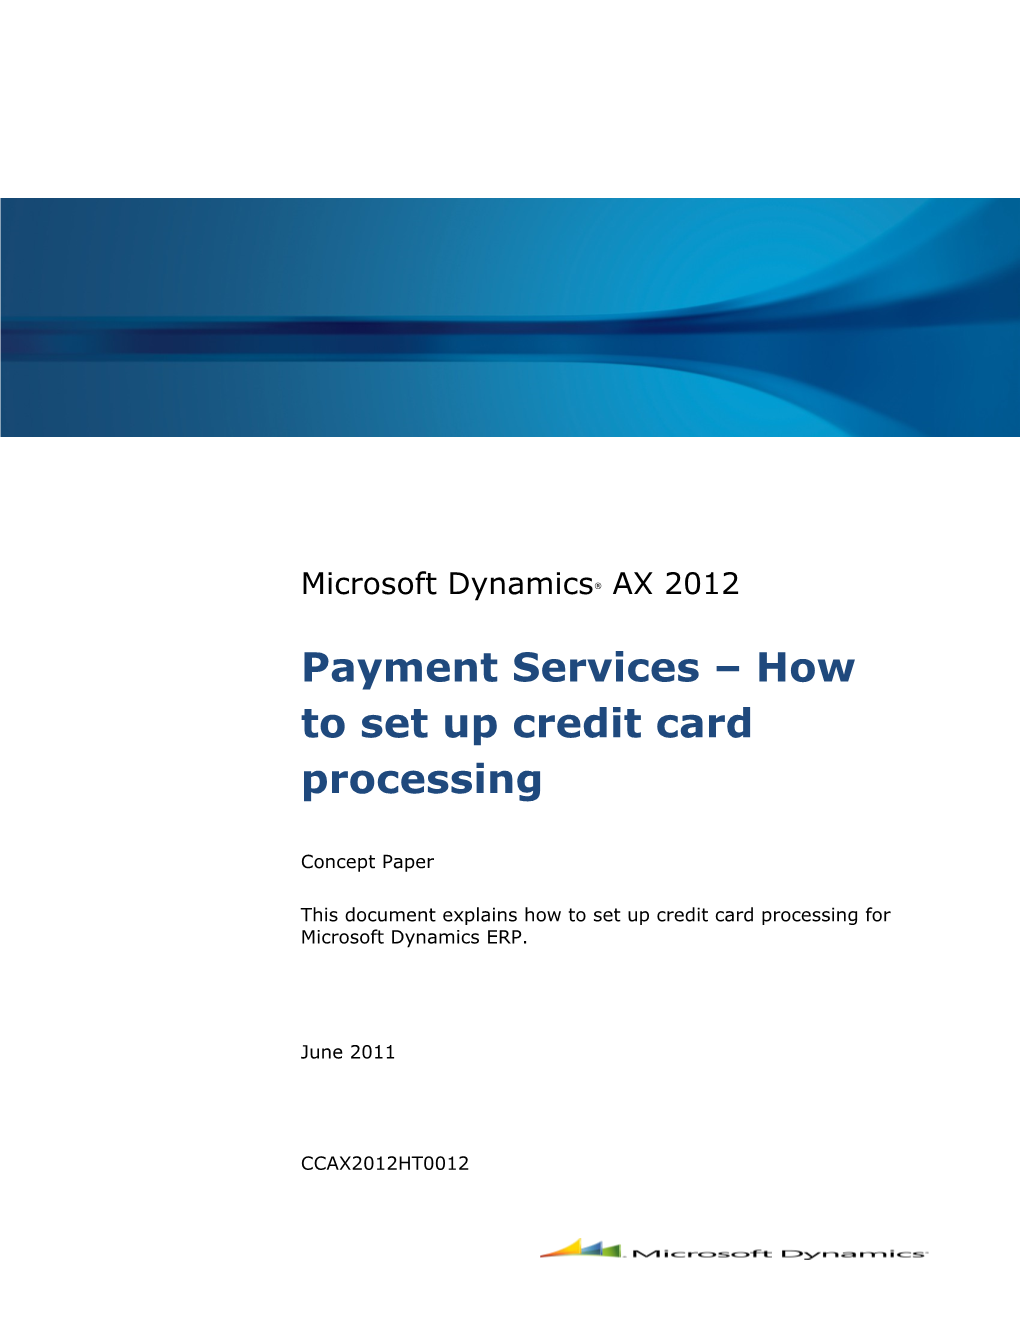 Payment Services How to Set up Credit Card Processing